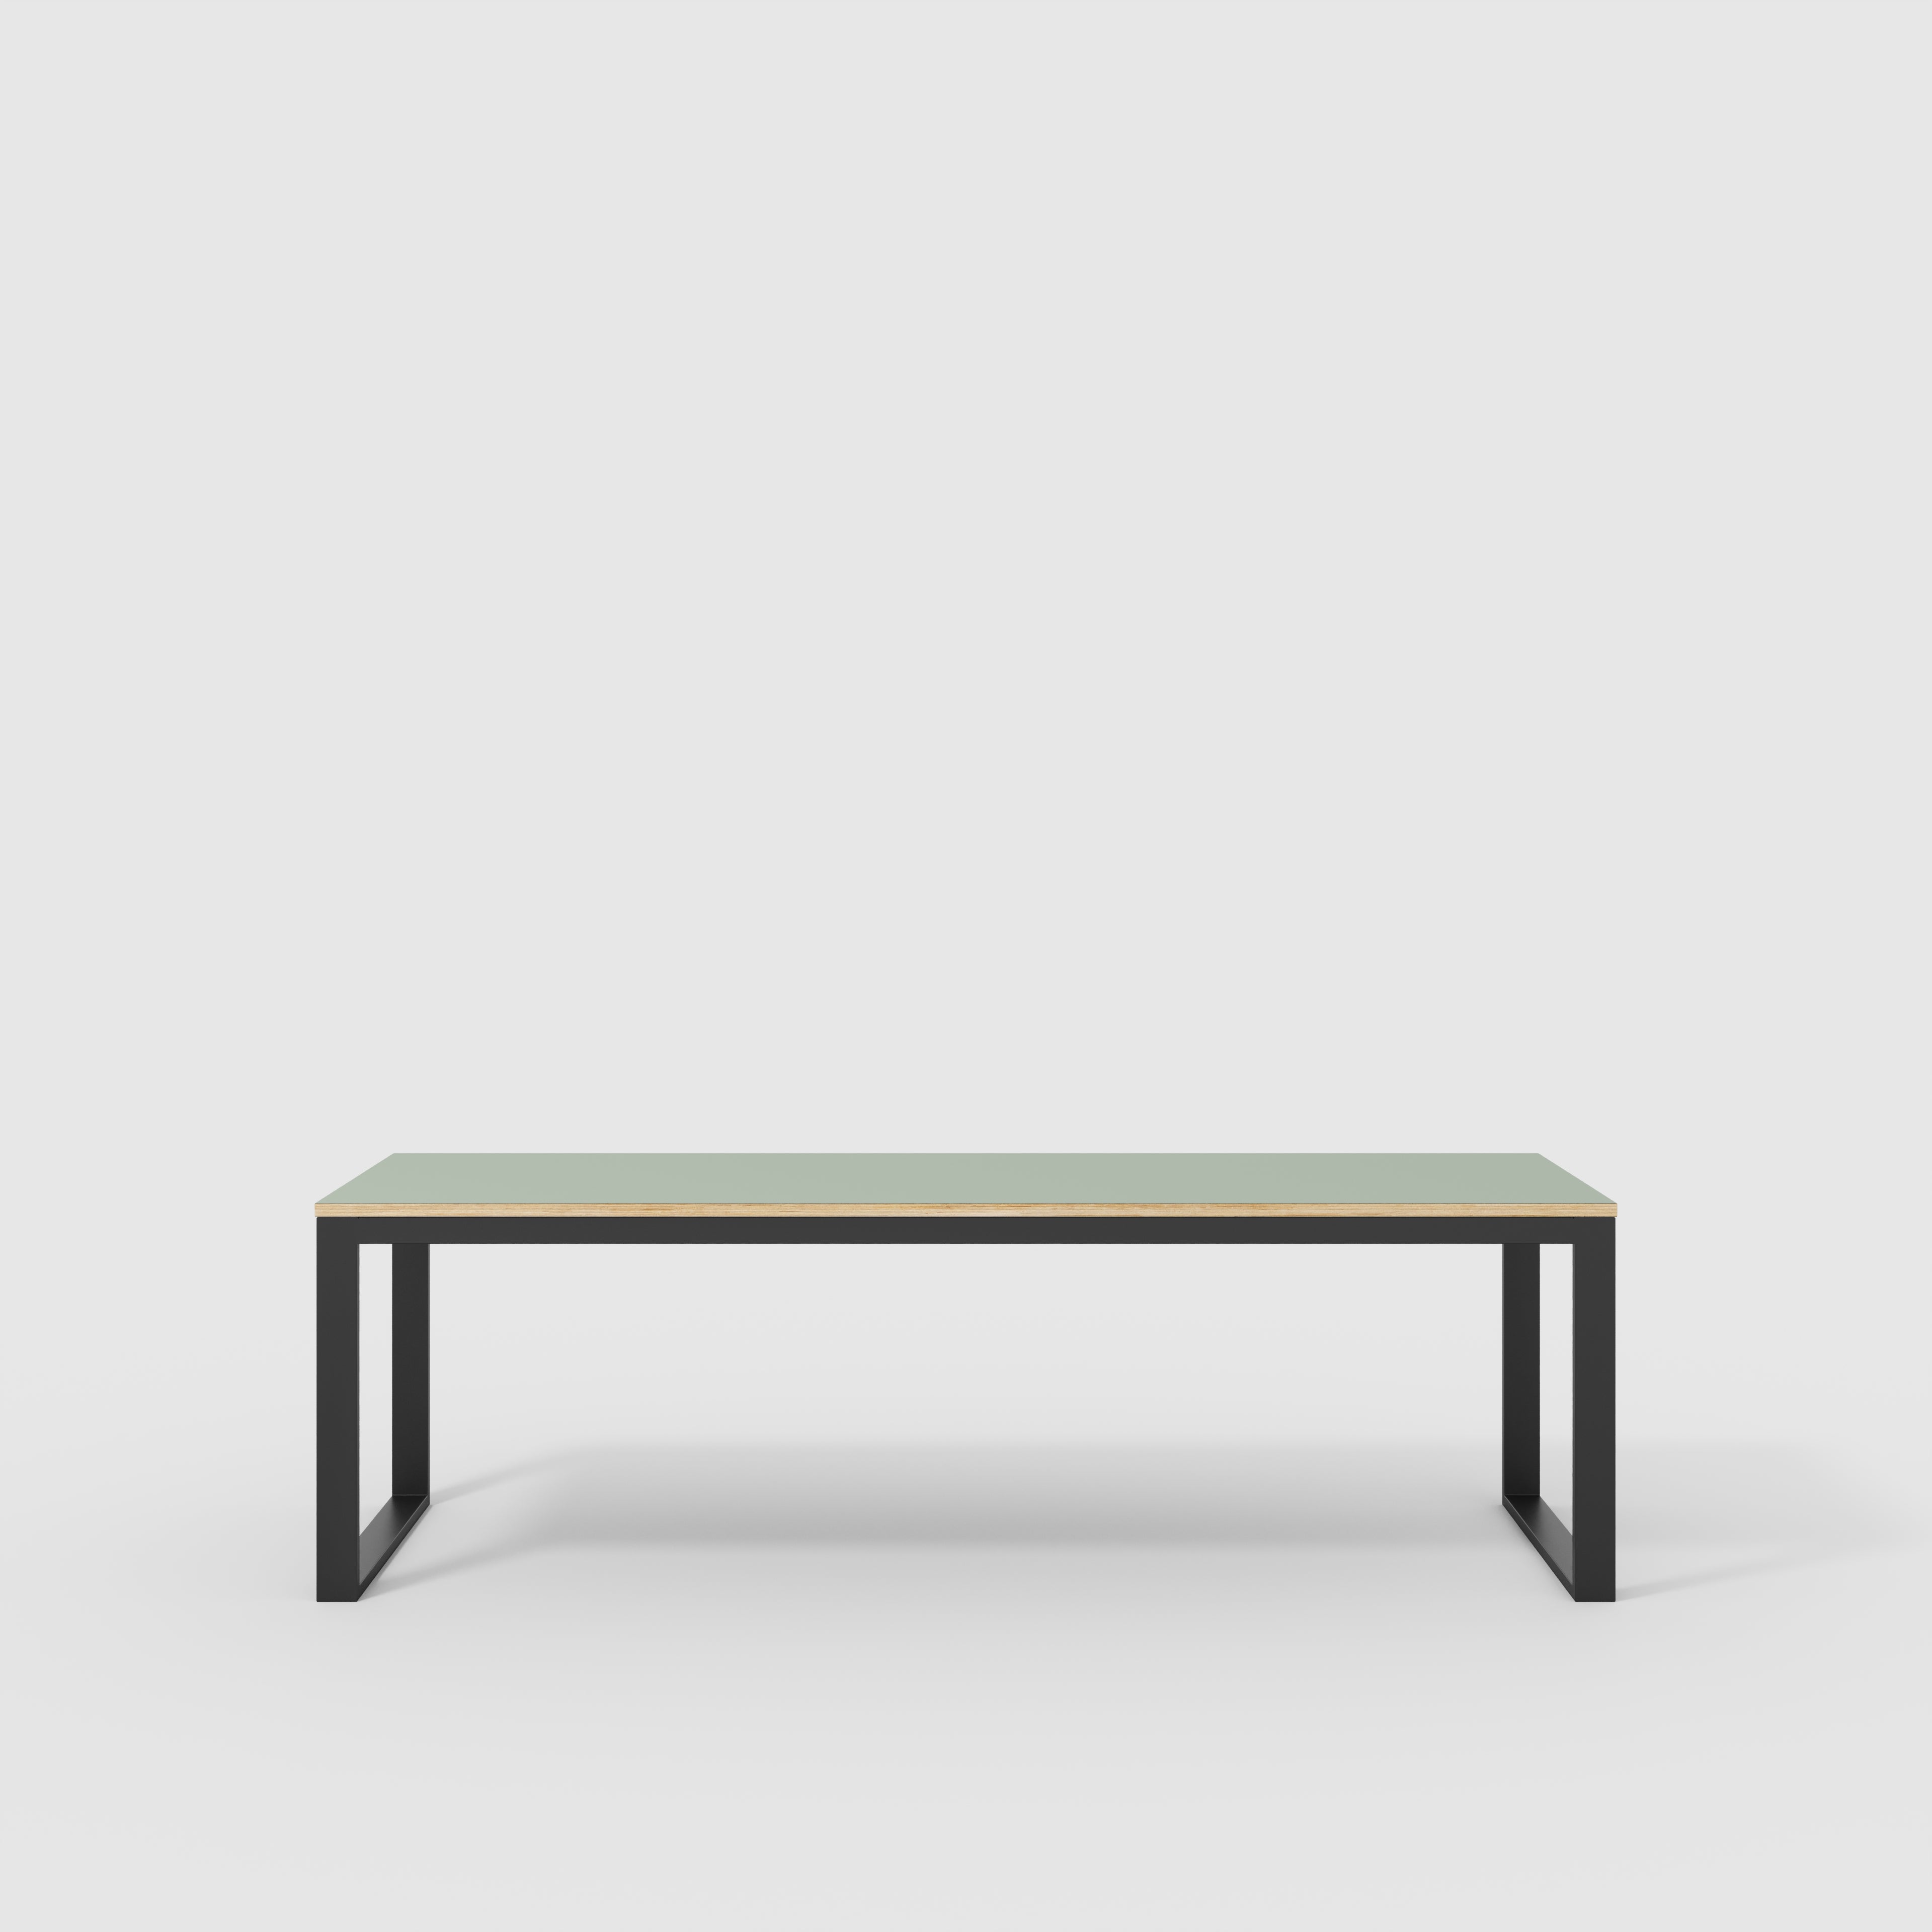 Table with Black Industrial Frame - Formica Green Slate - 2400(w) x 745(d) x 735(h)